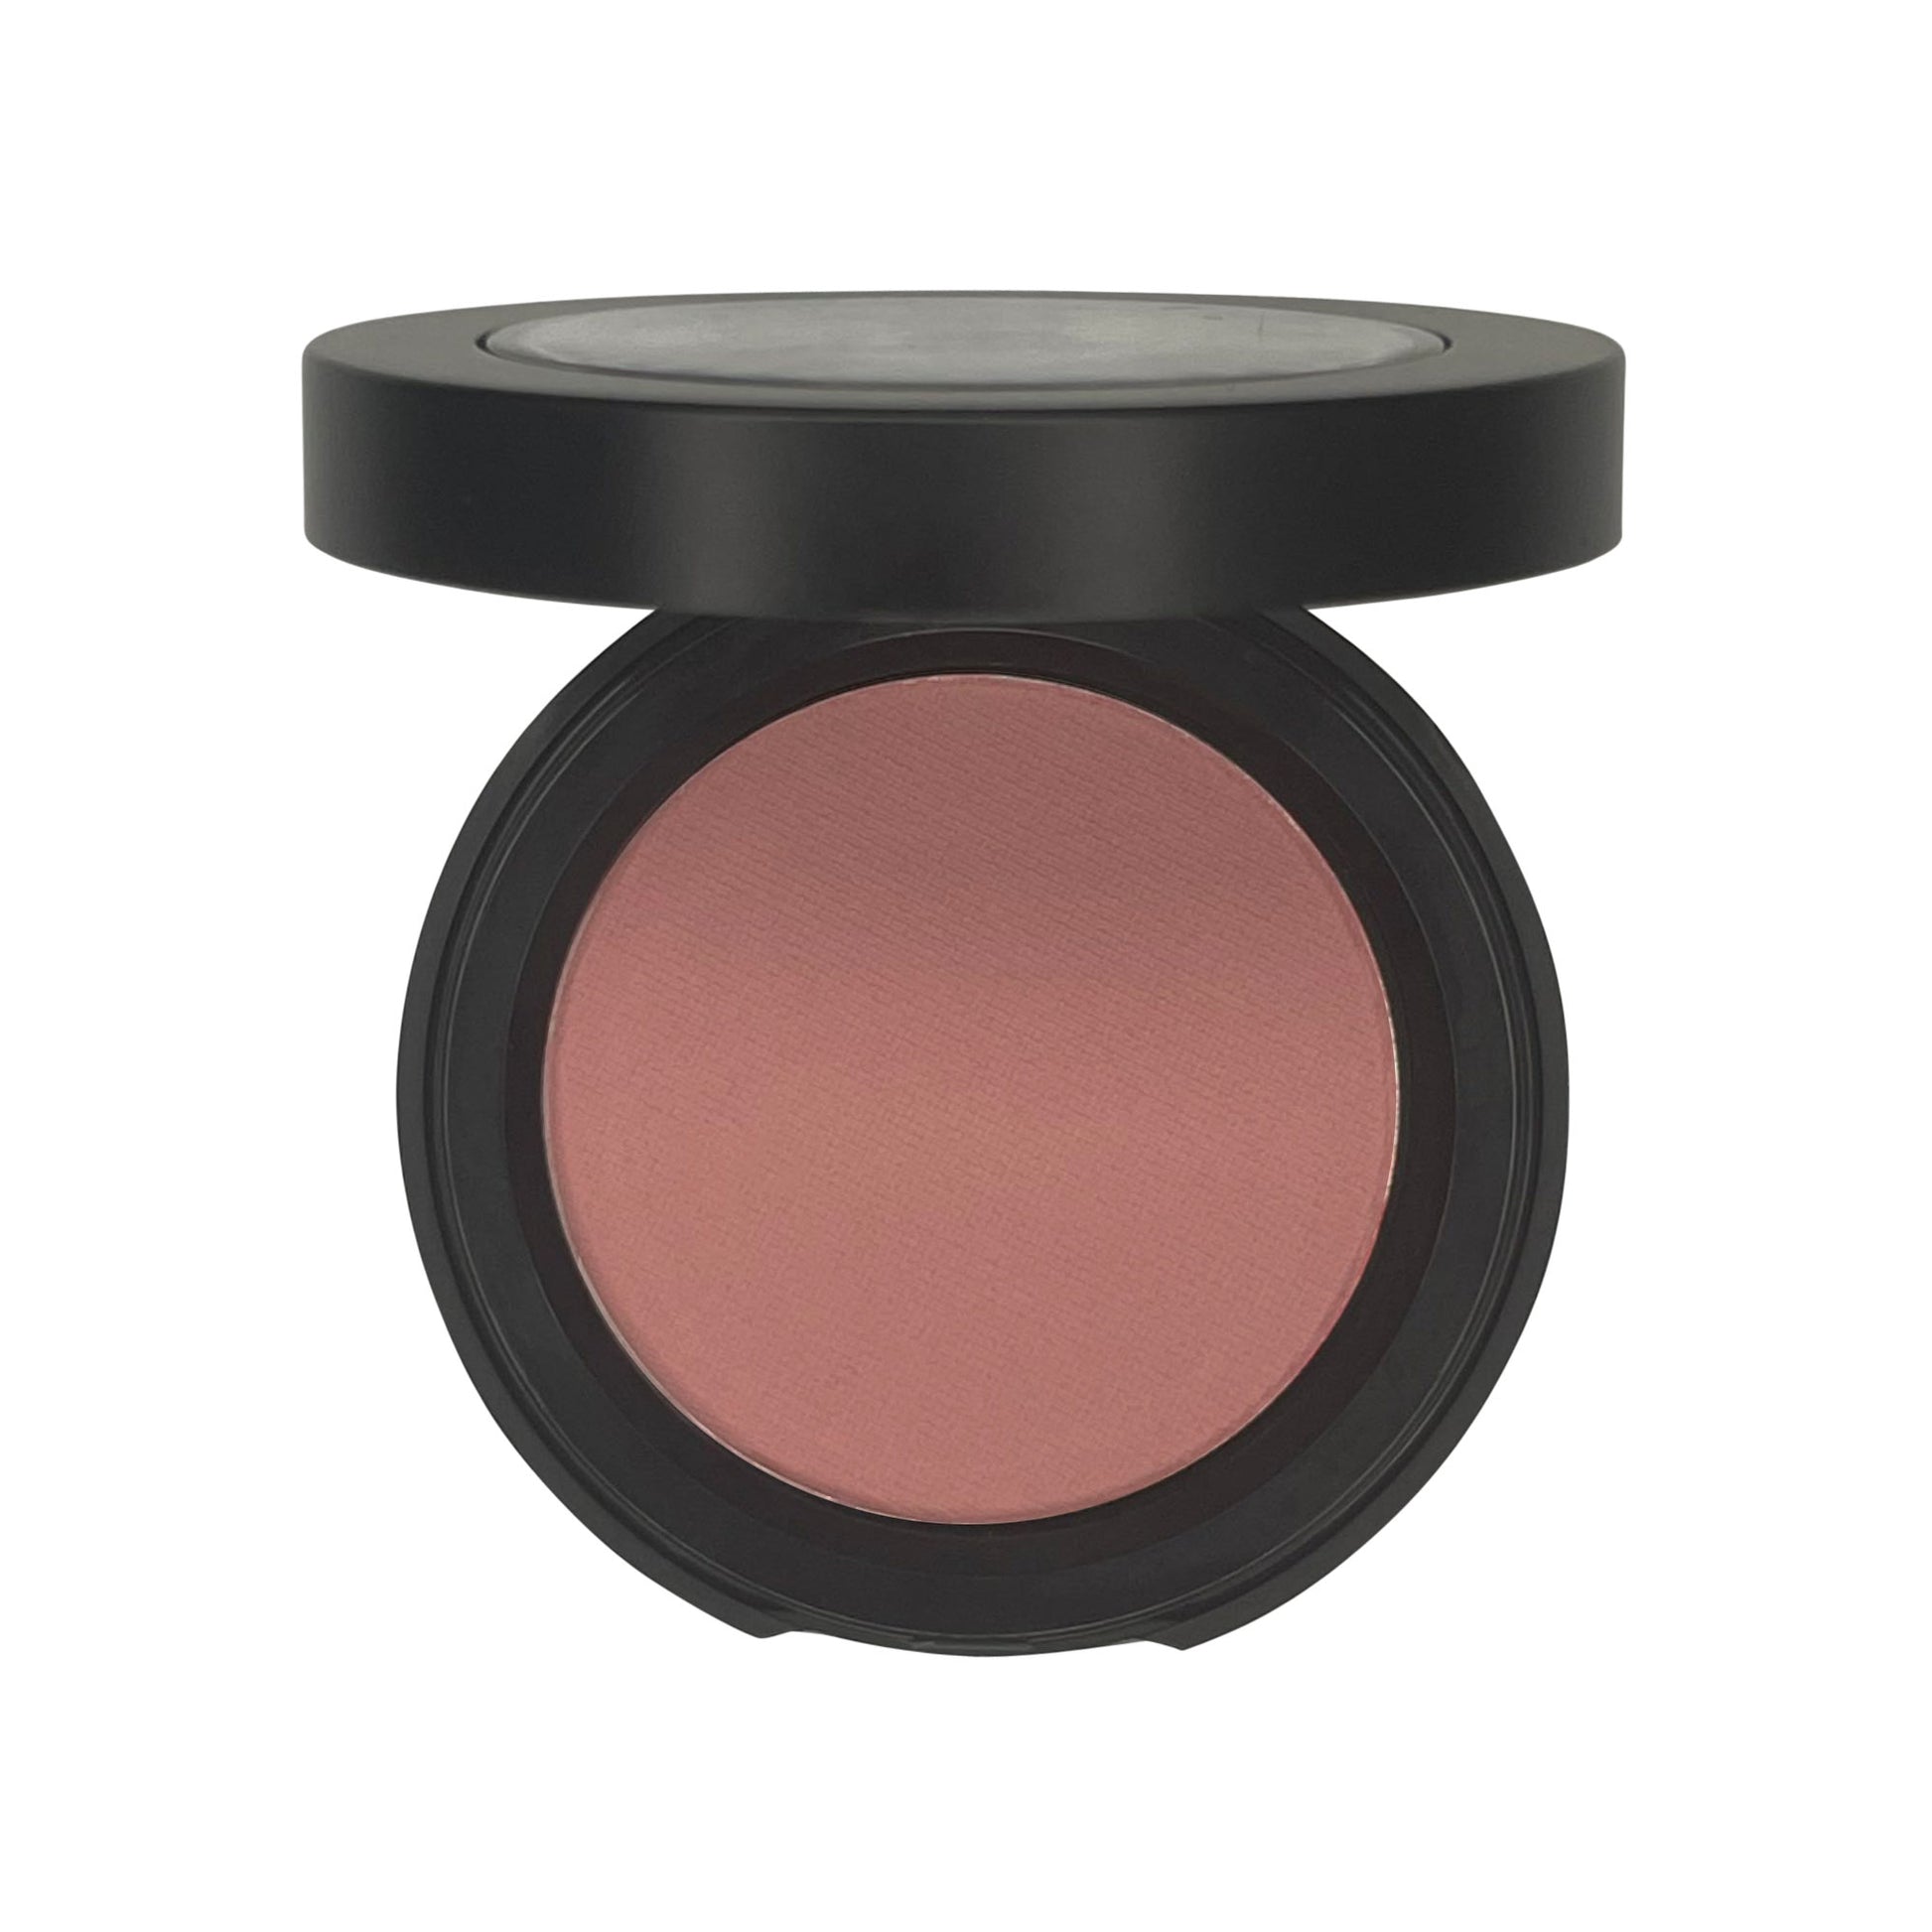 Get glowing skin with Cruisin Organics Macaron blush. Talc-free and triple-milled, this single pan blush blends seamlessly for a radiant look. Perfect for all occasions, mix and match your favorite shades. Clean beauty at its best.